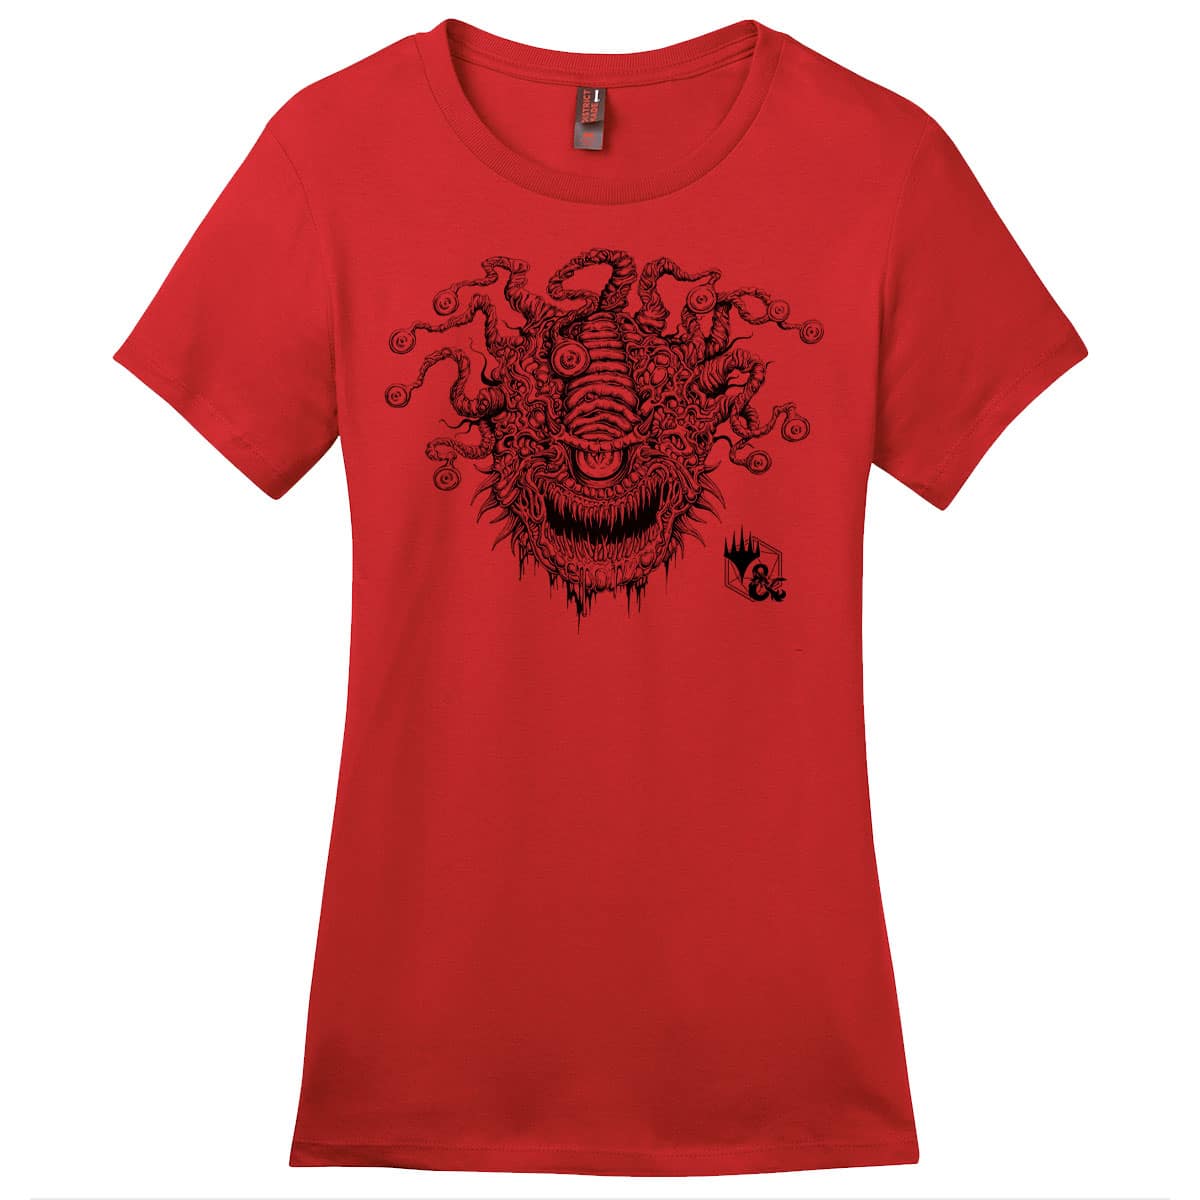 Adventures in the Forgotten Realms Baleful Beholder T-Shirt for Dungeons & Dragons - MTG Pro Shop